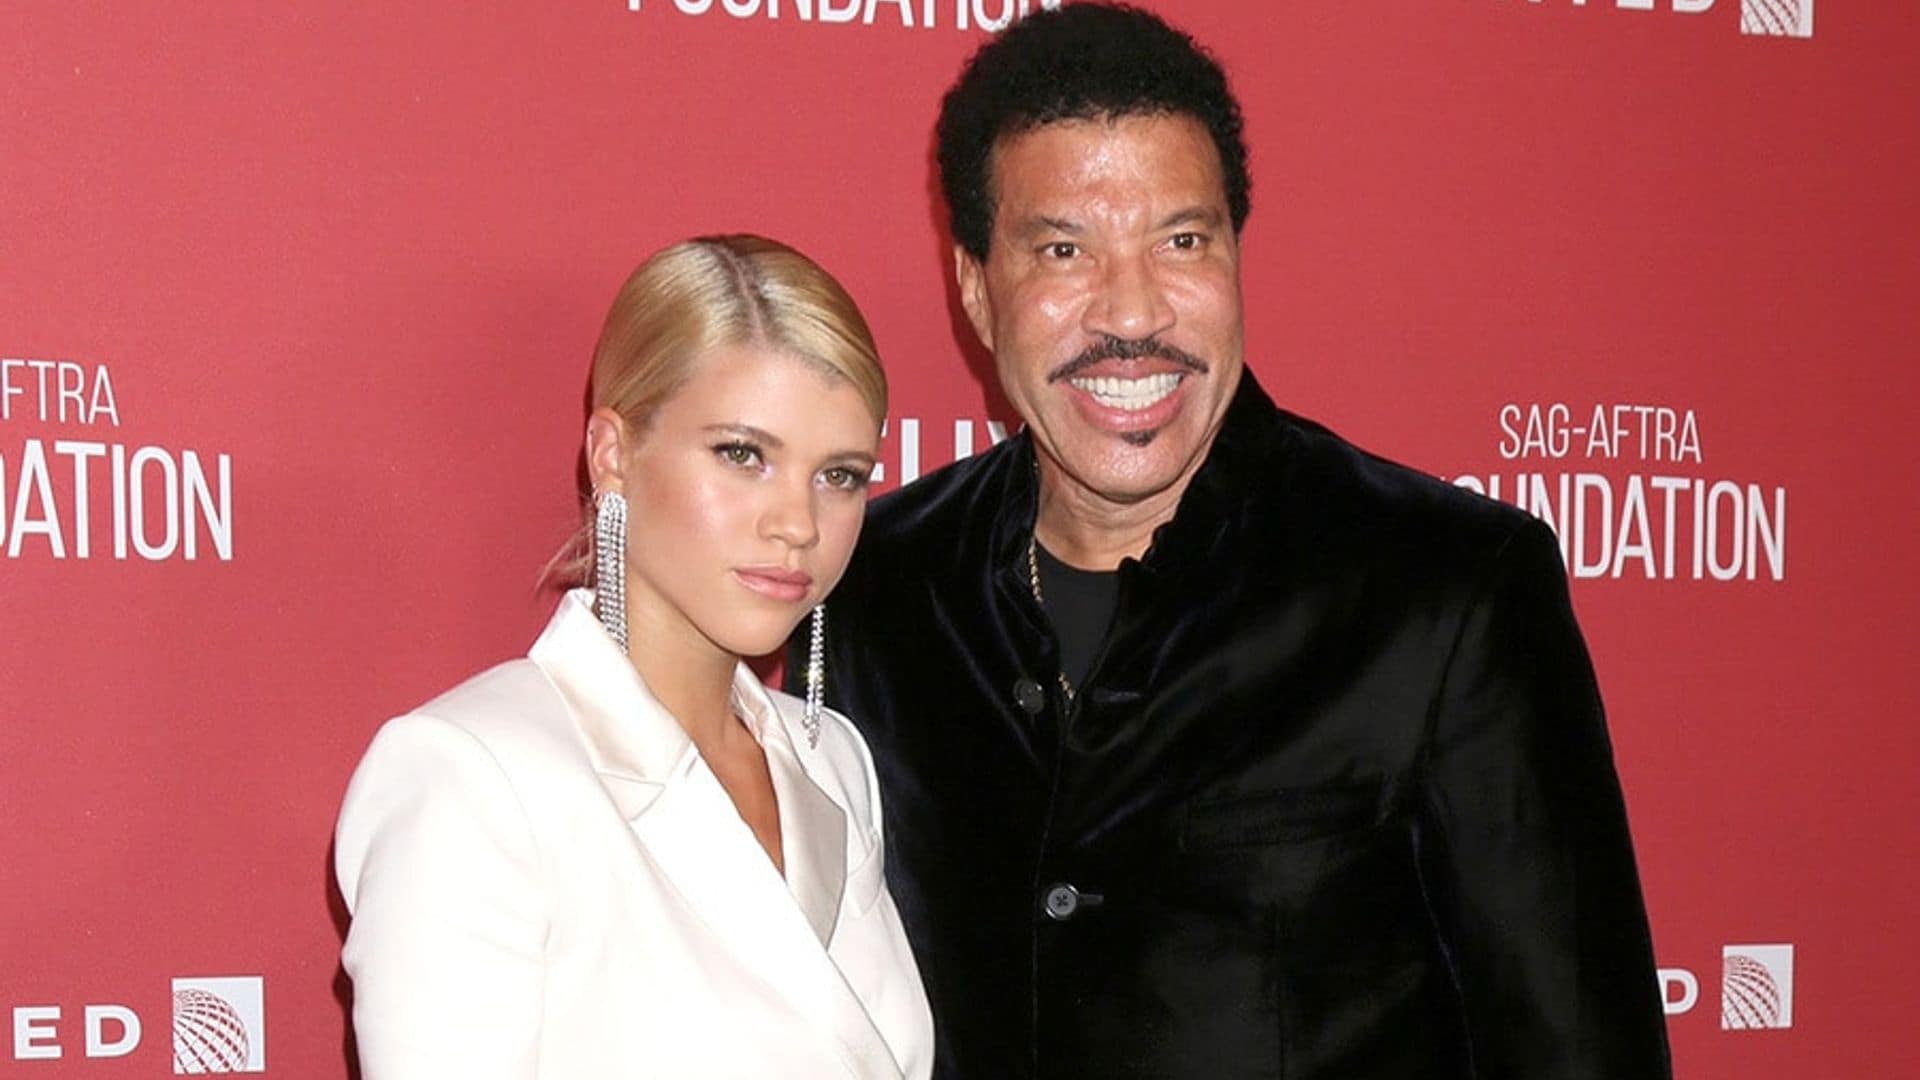 Lionel Richie on daughter Sofia's romance with Scott Disick: 'It's just a phase'